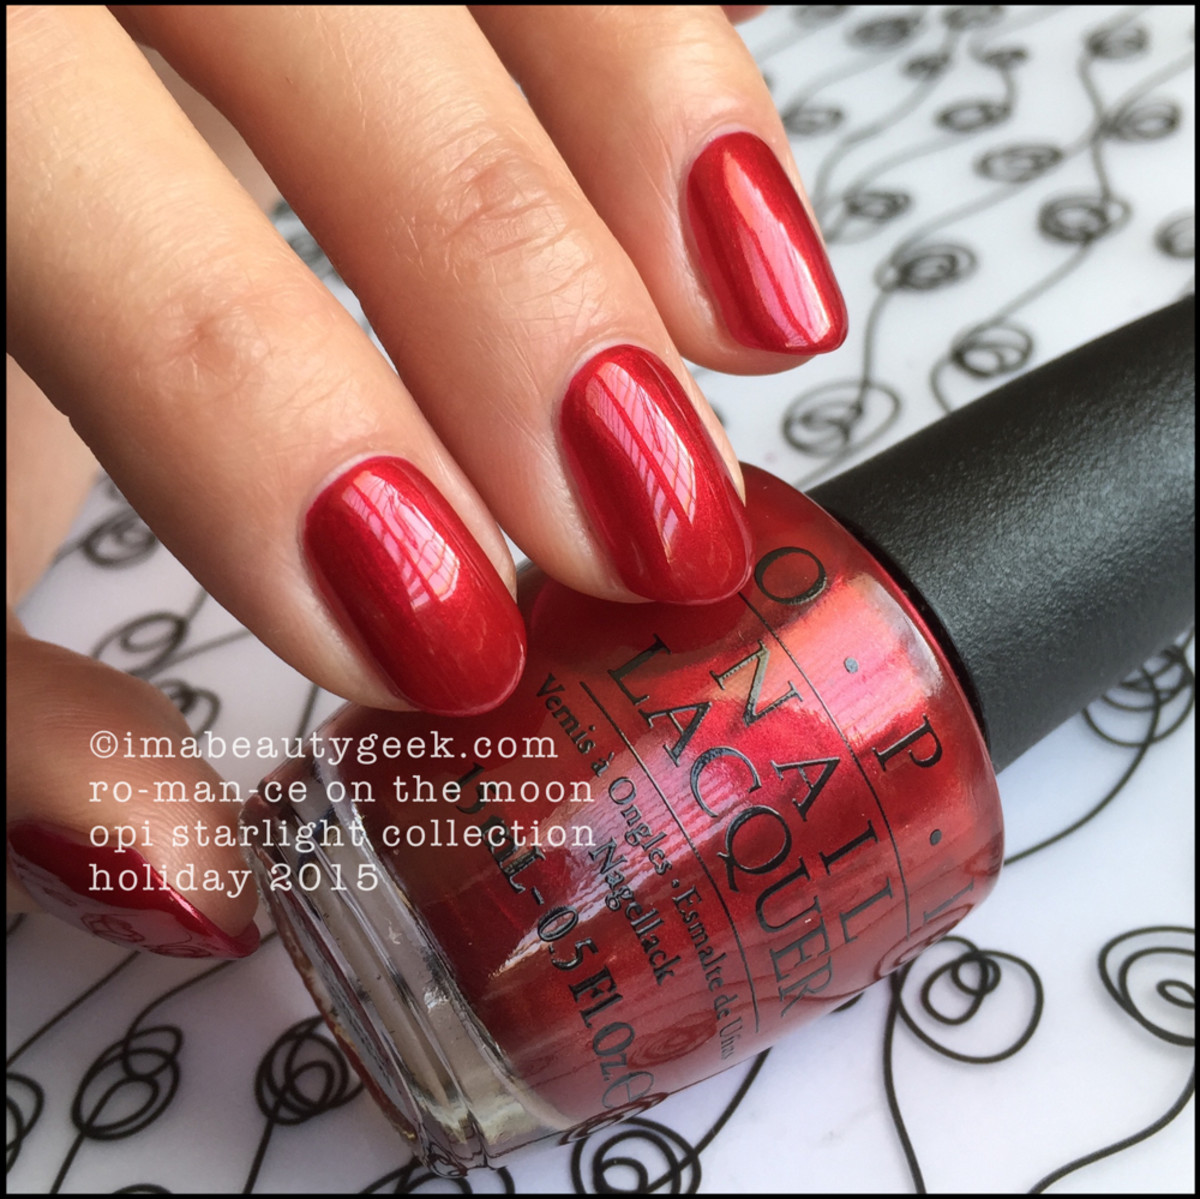 OPI Romance on the Moon_OPI Starlight Collection Holiday 2015